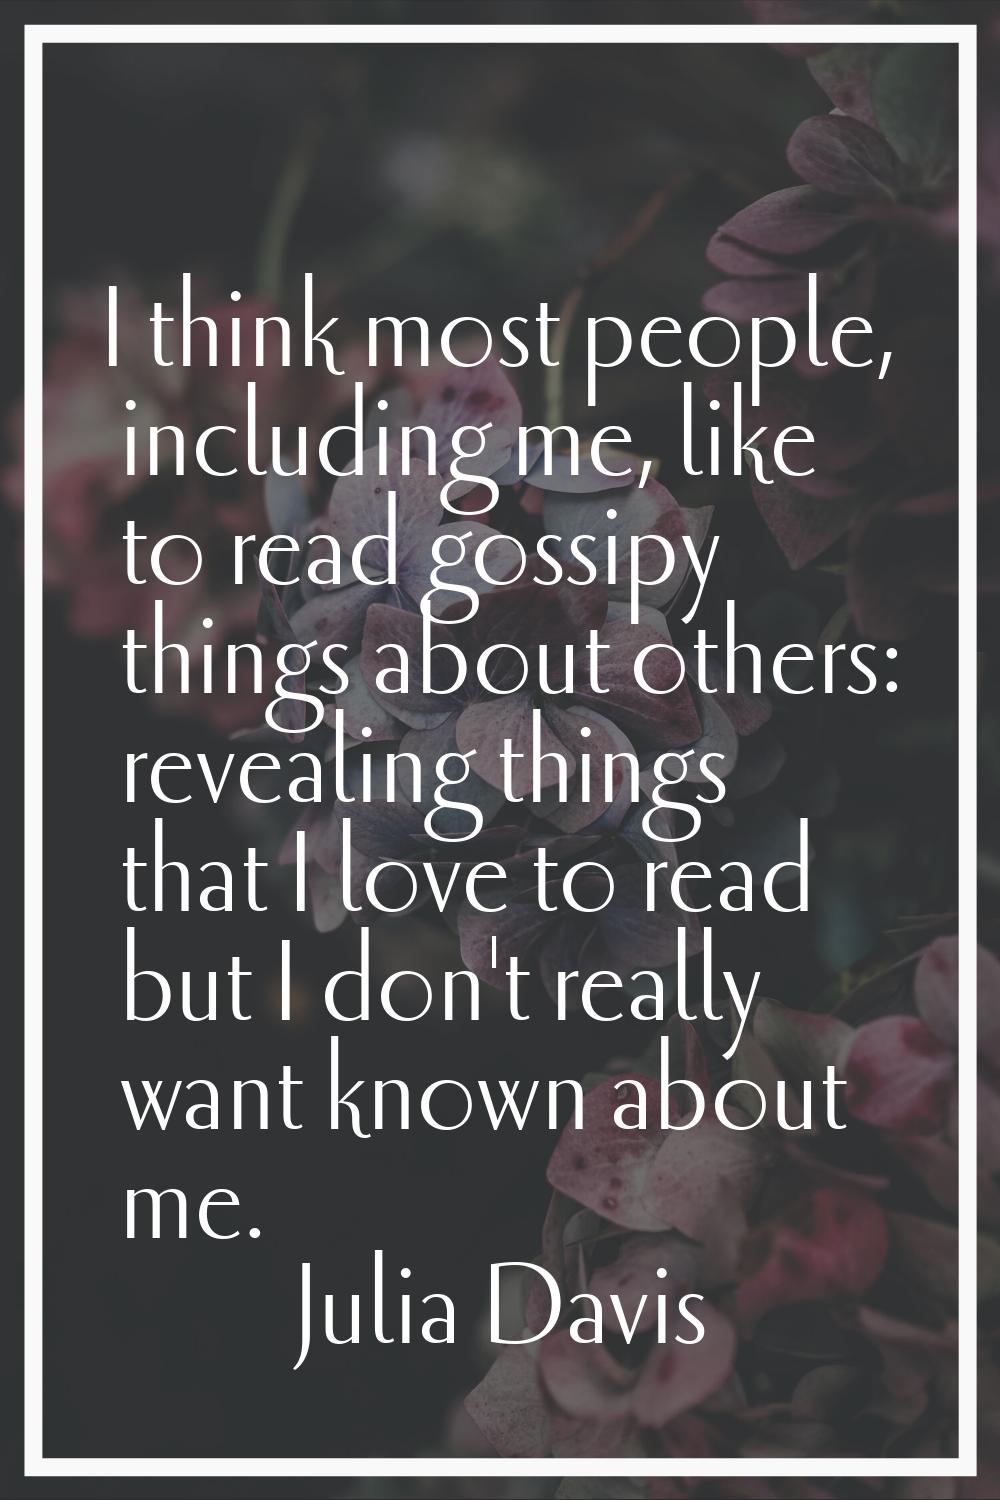 I think most people, including me, like to read gossipy things about others: revealing things that 